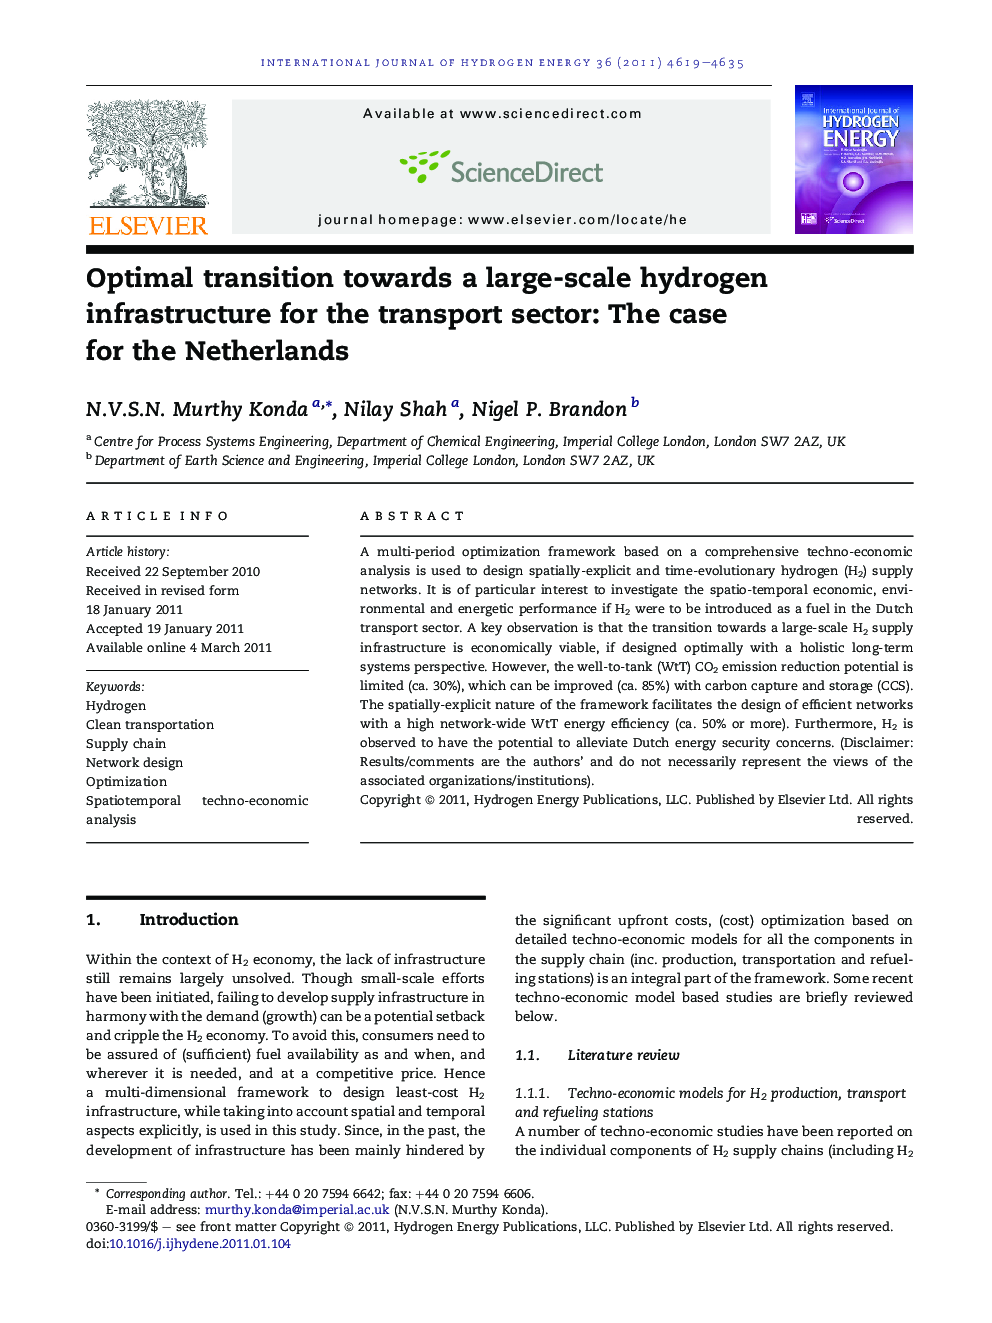 Optimal transition towards a large-scale hydrogen infrastructure for the transport sector: The case for the Netherlands